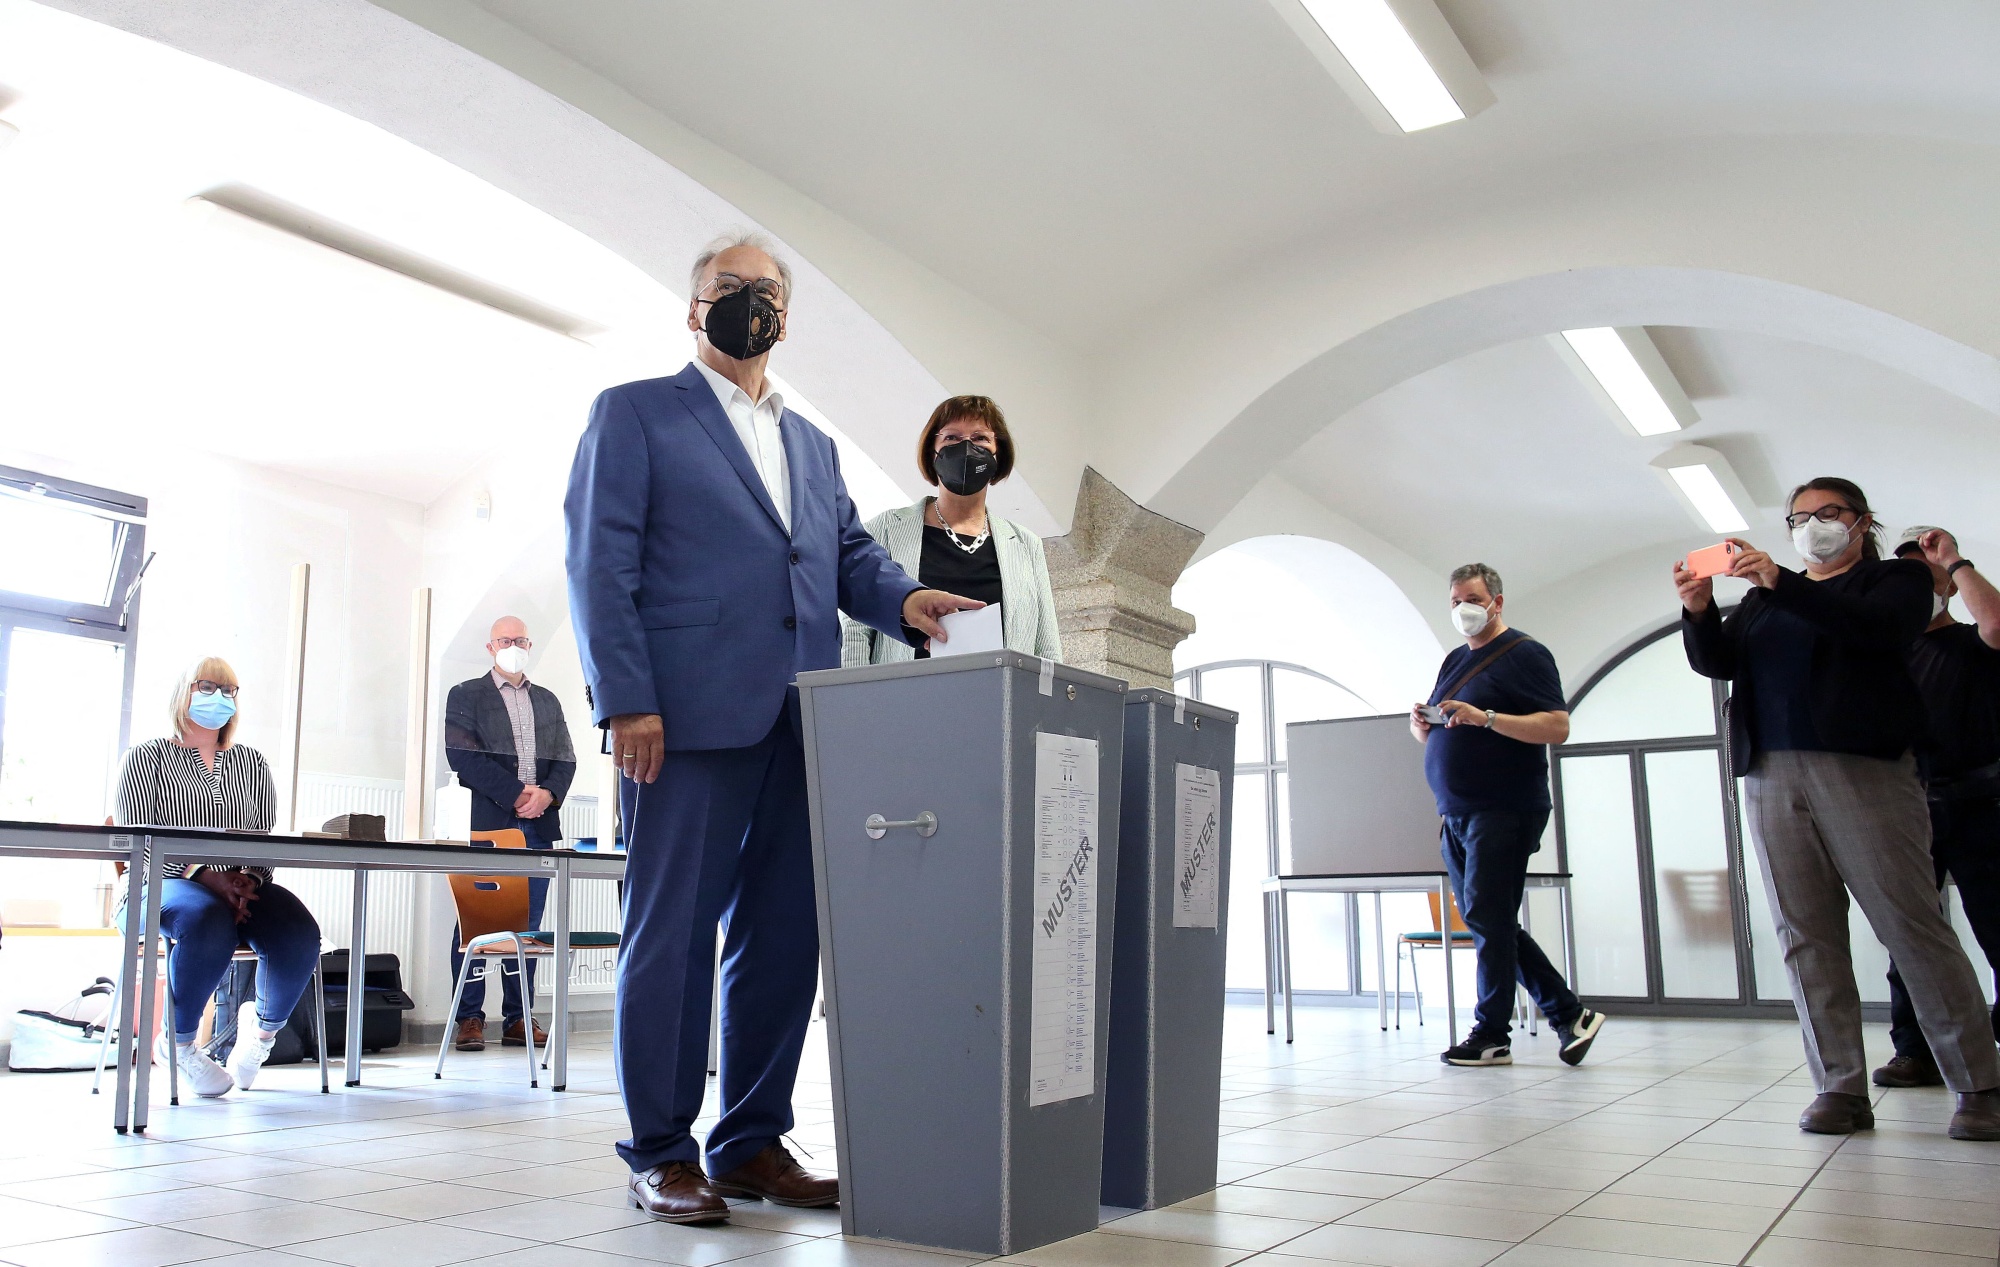 Reiner Haseloff casts his ballot for state elections in Saxony-Anhalt.